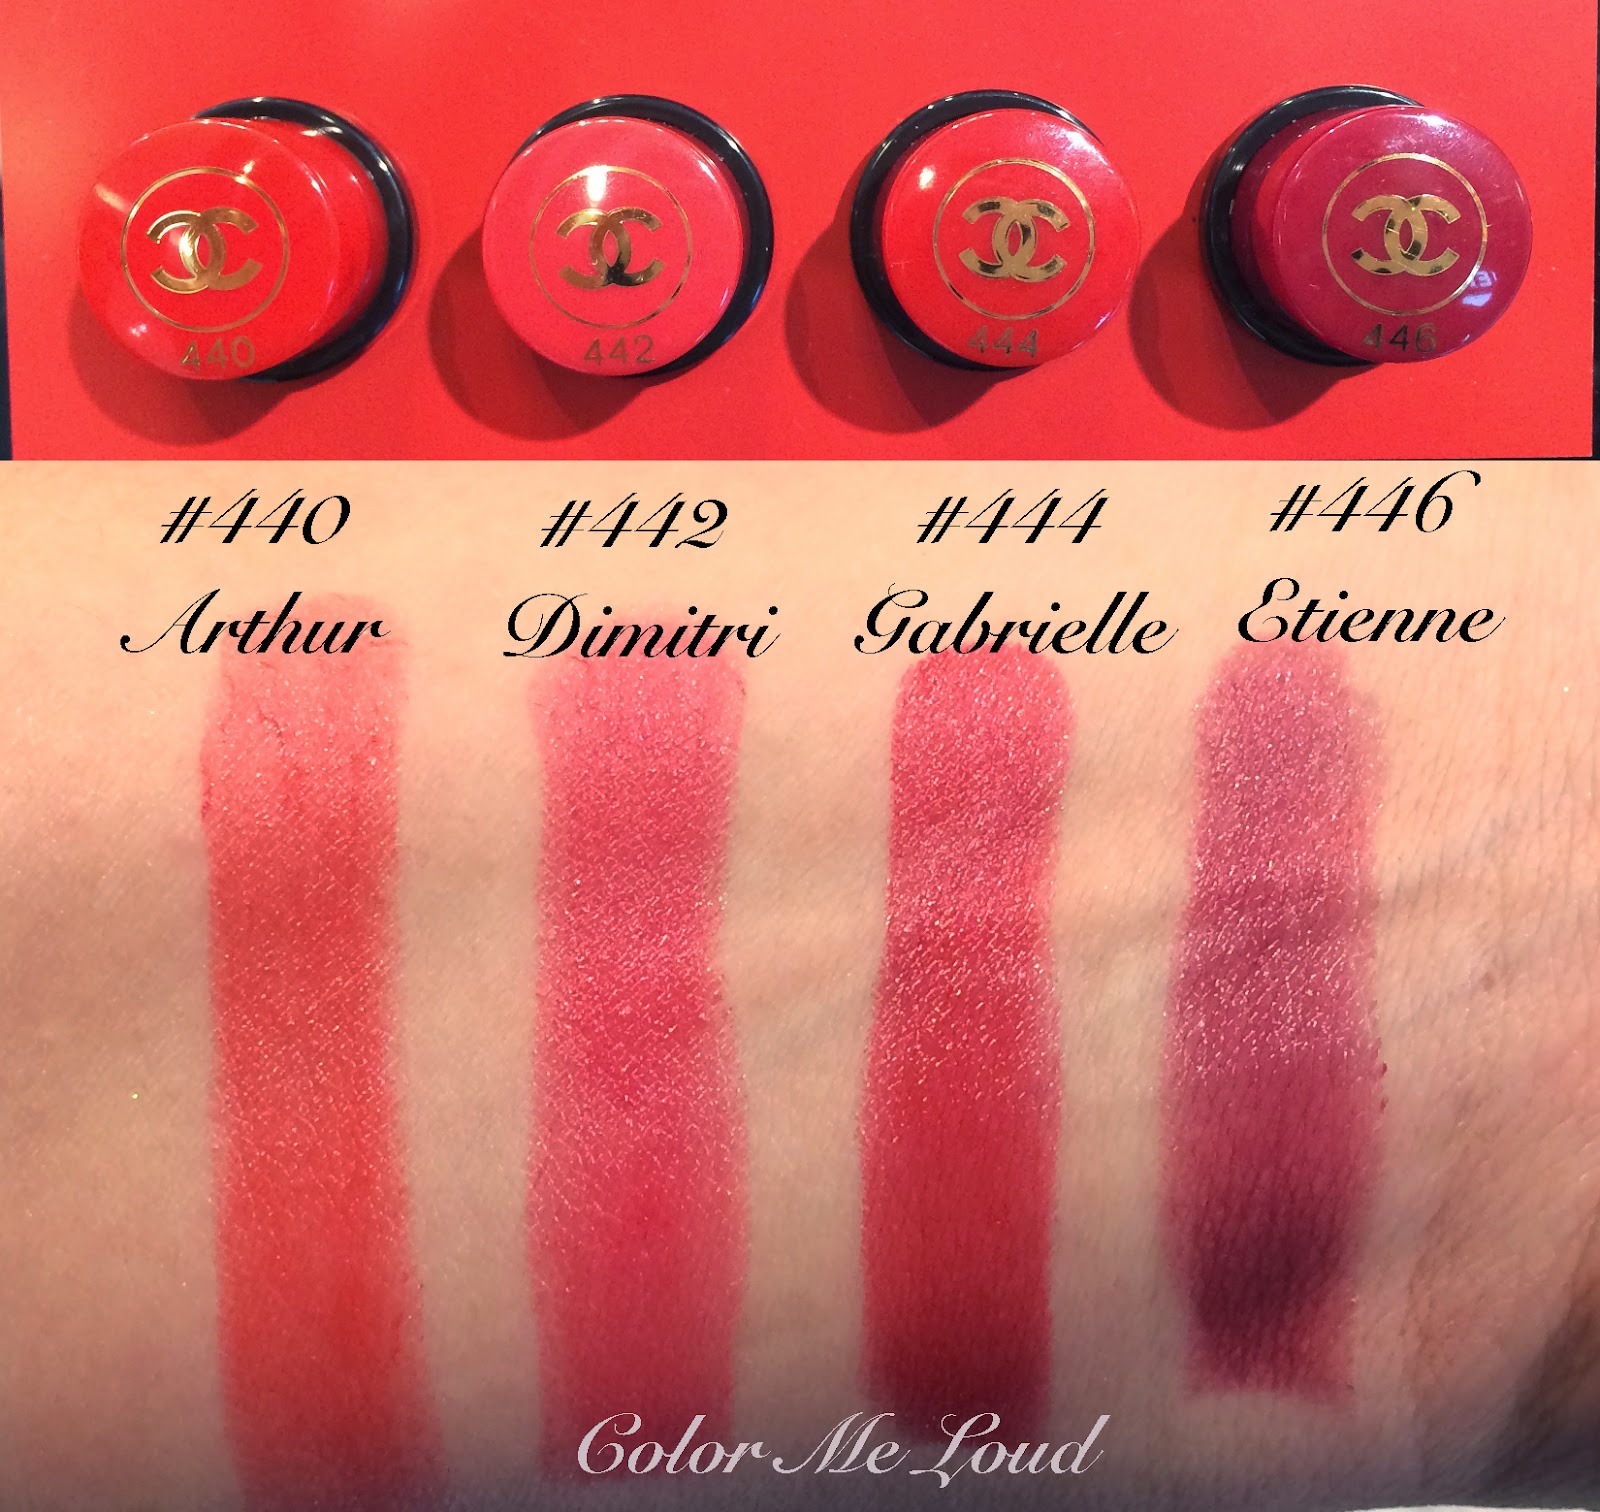 Chanel Rouge Coco Lipstick Relaunch, Swatches of All The Shades, Spring  2015